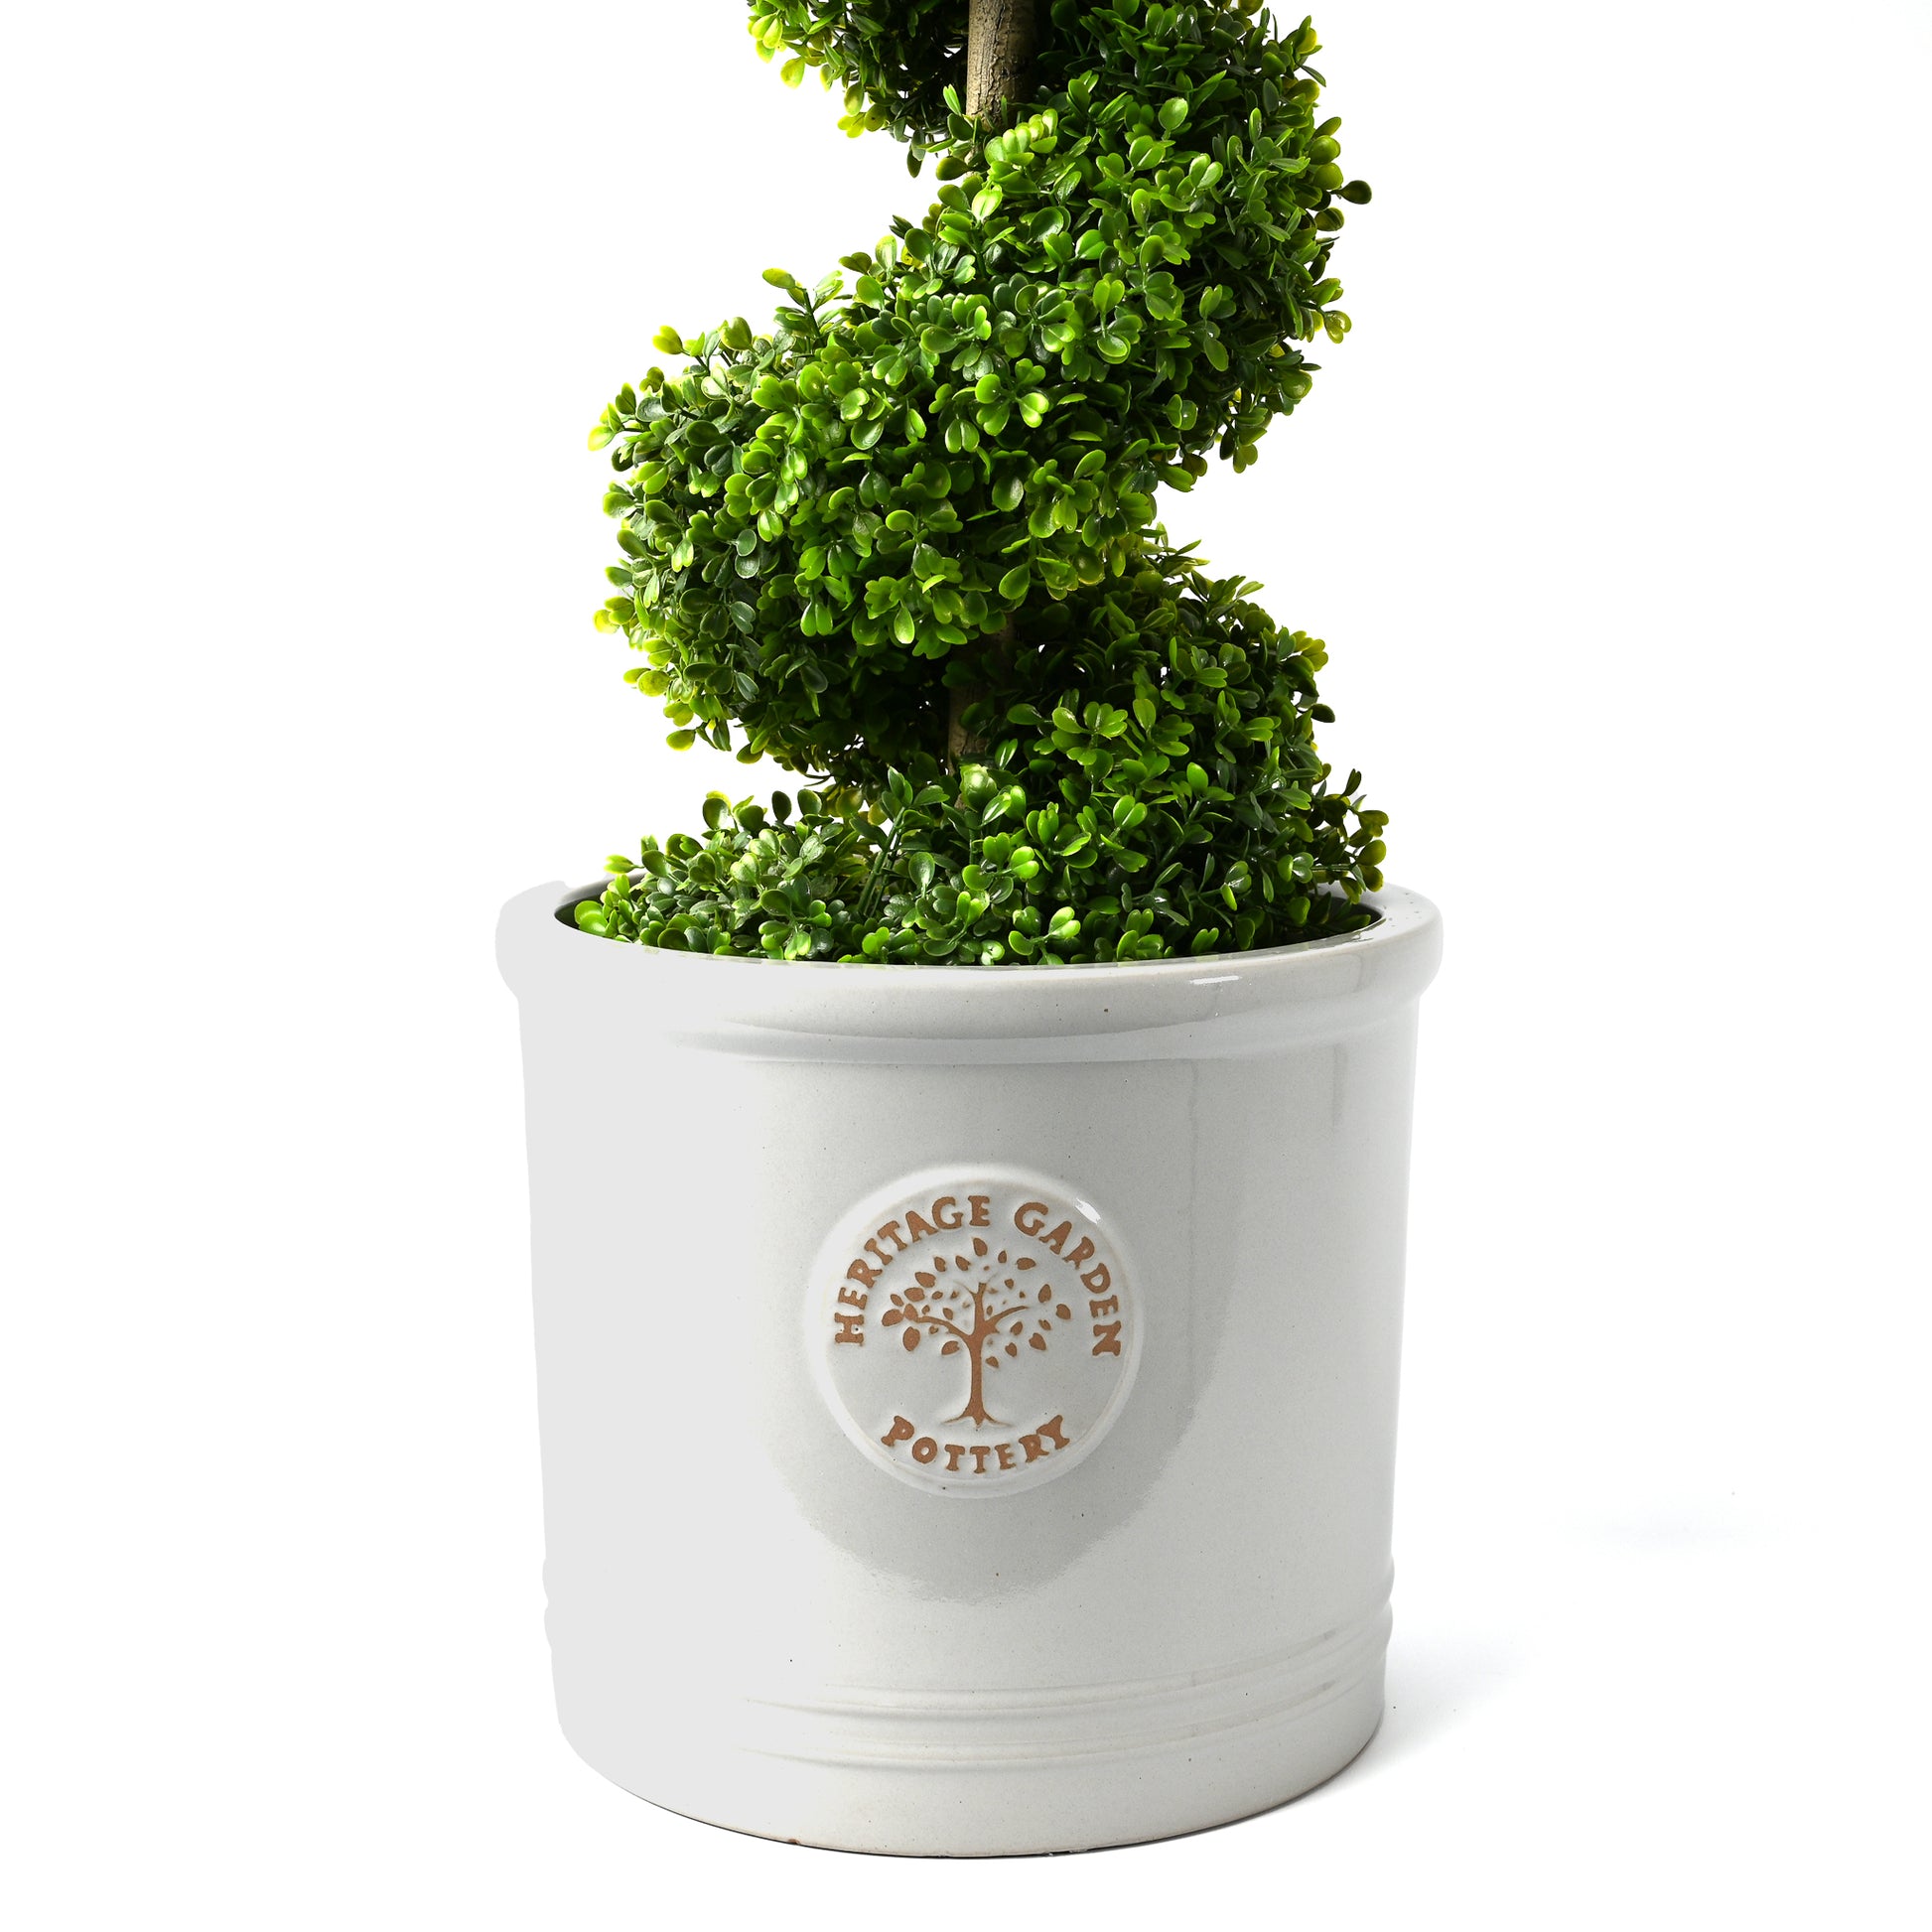 Grey pot with topiary 